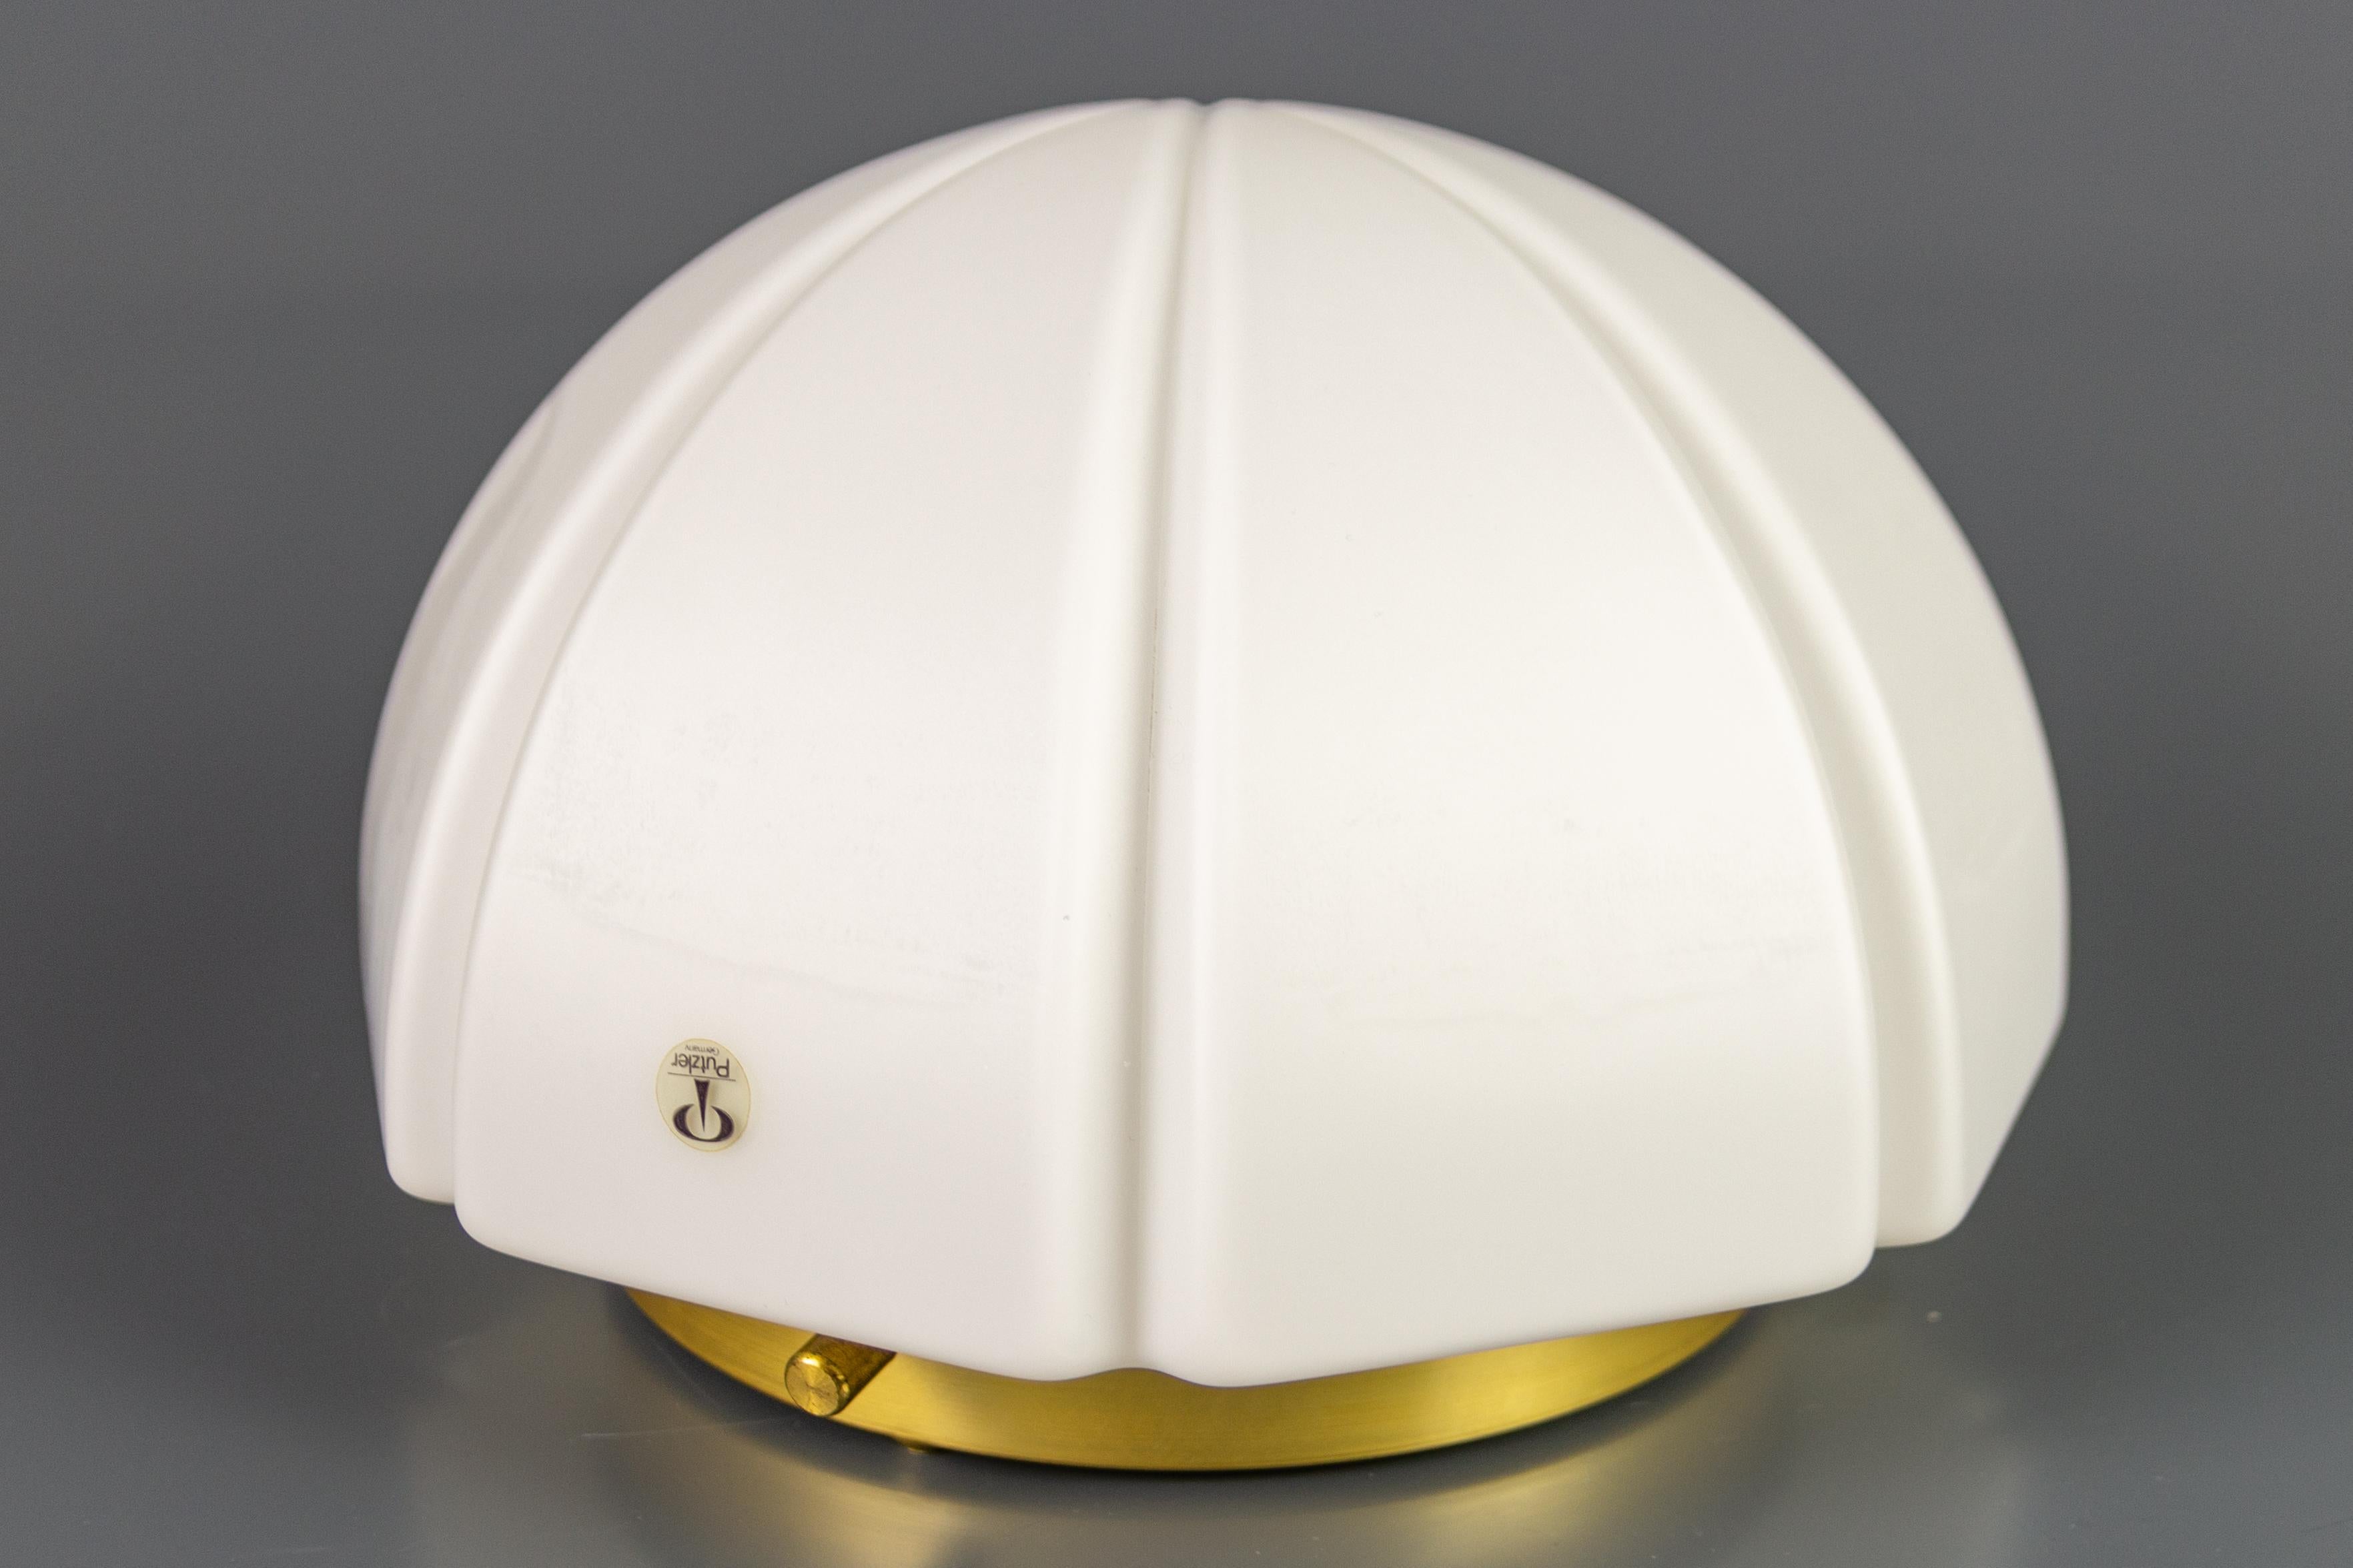 Elegant flush mount or ceiling light by Peill & Putzler, Germany, 1970s. The ceiling light features a round brass ceiling mount and a beautiful lightly pearlized white glass shade.
Timeless design, rare model, and high quality.
Dimensions: height: